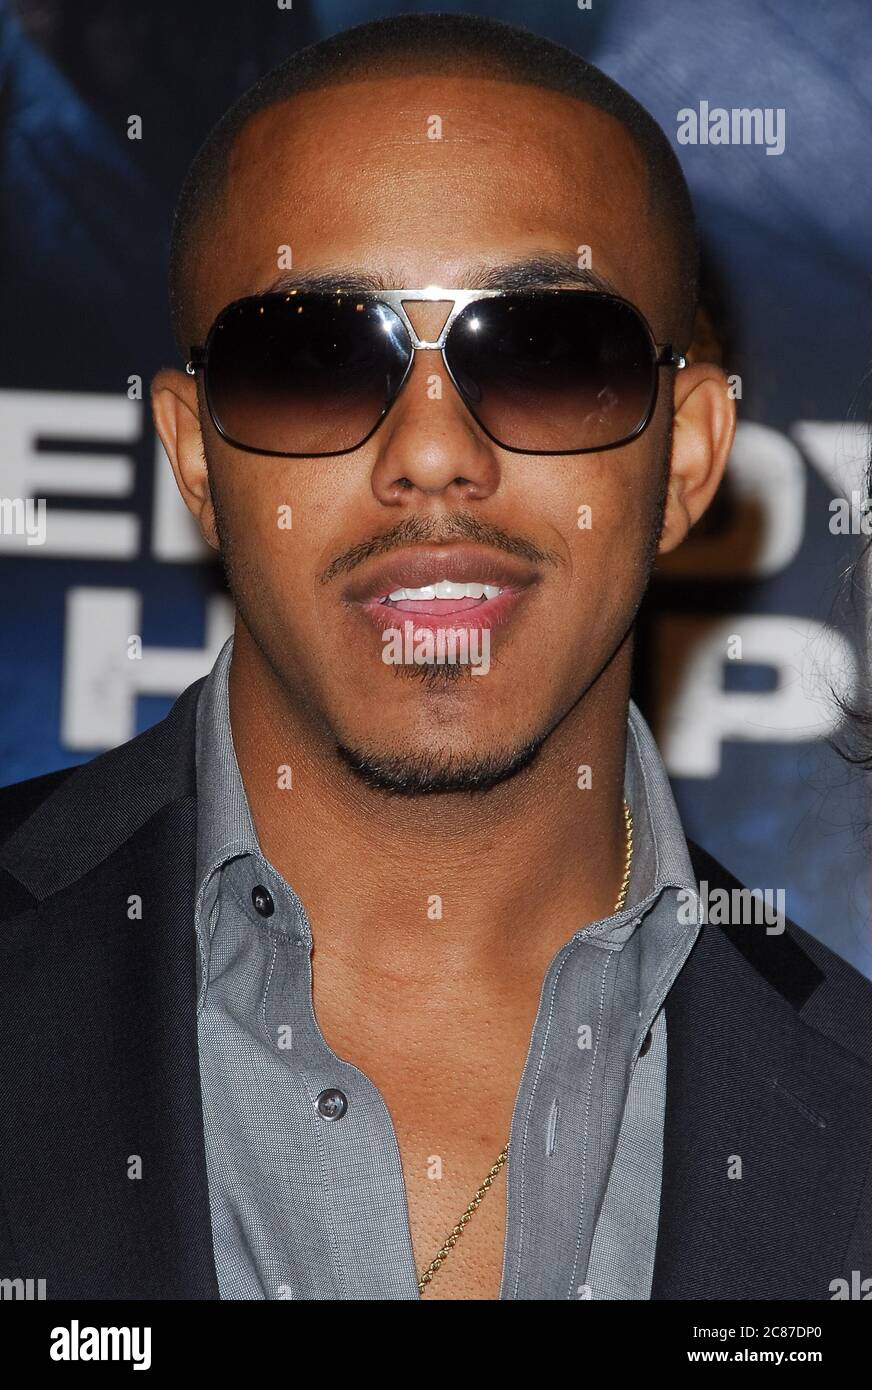 Marques Houston at the Premiere of 'Somebody Help Me' held at the Grauman's Chinese Theater in Hollywood, CA. The event took place on Thursday, October25, 2007. Photo by: SBM / PictureLux- File Reference # 34006-9264SBMPLX Stock Photo